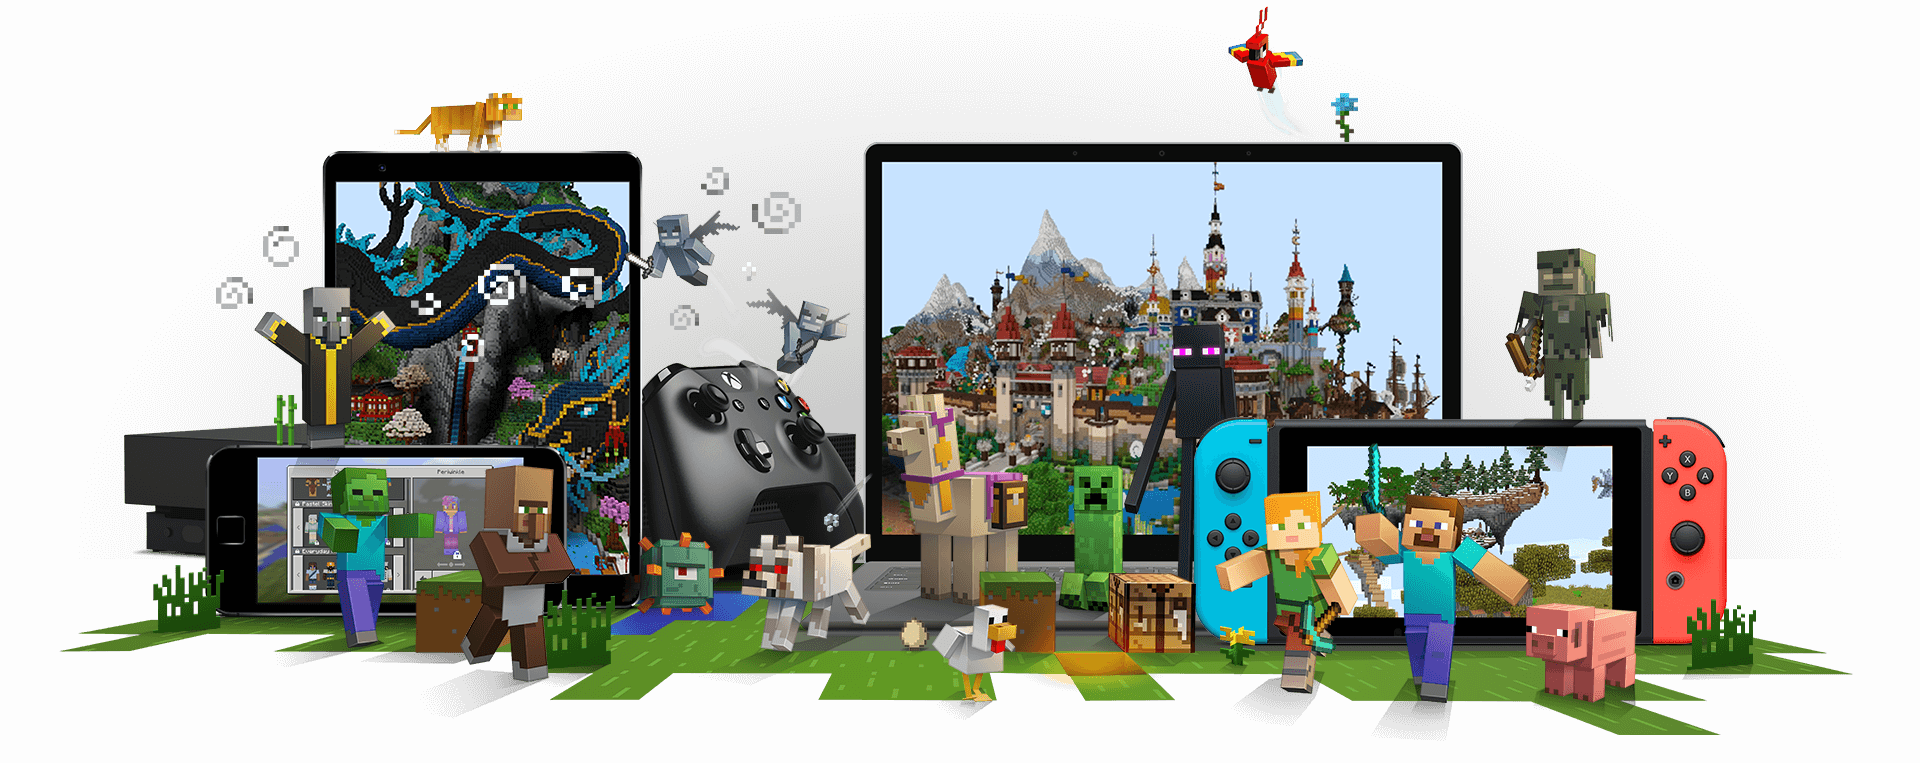 Minecraft characters surrounding devices where Minecraft is playable, including an Xbox, mobile phone, laptop PC and Nintendo Switch.